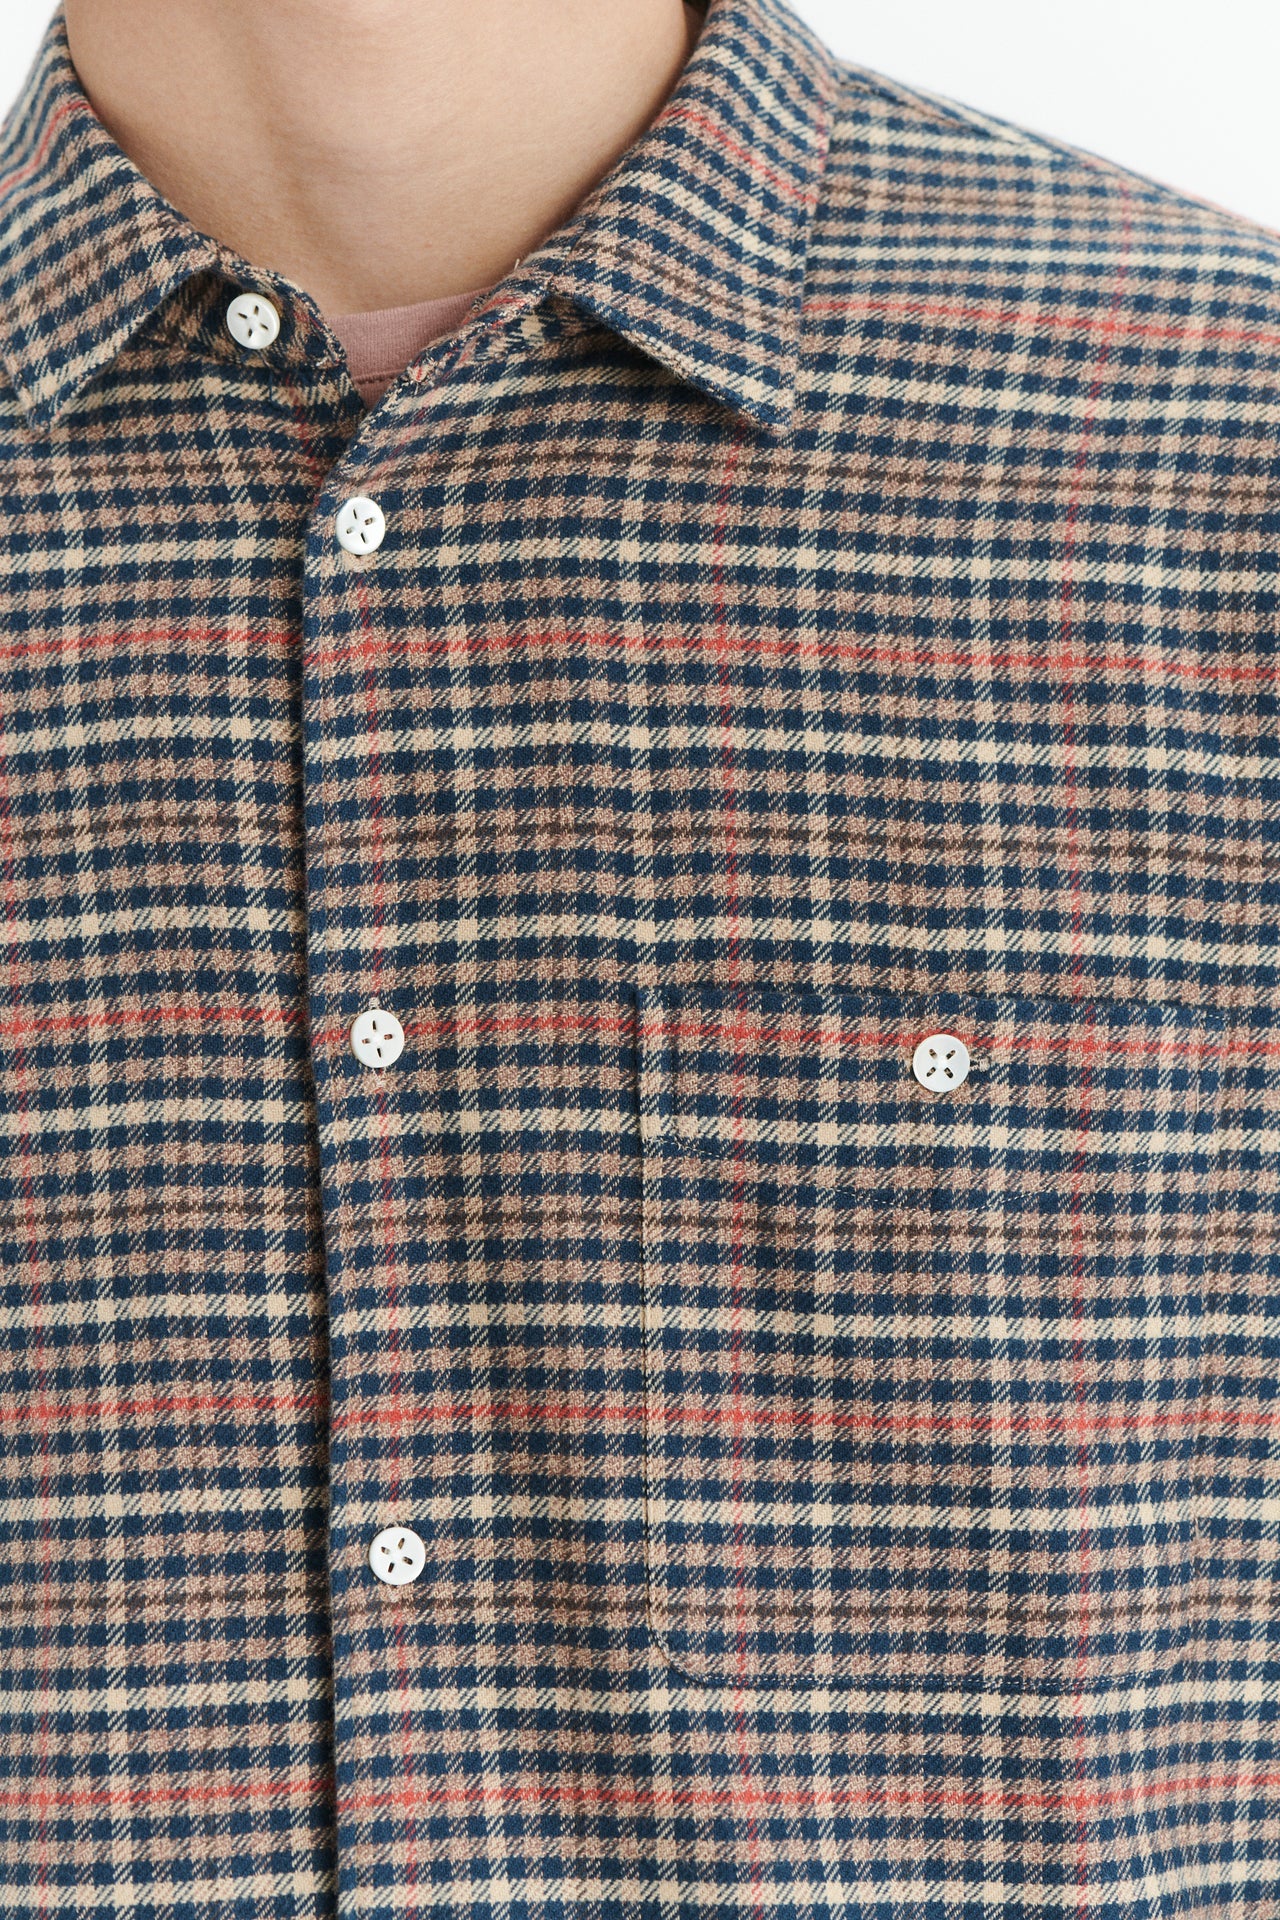 Strong Shirt in a Red Checquered Portuguese Cotton Flannel